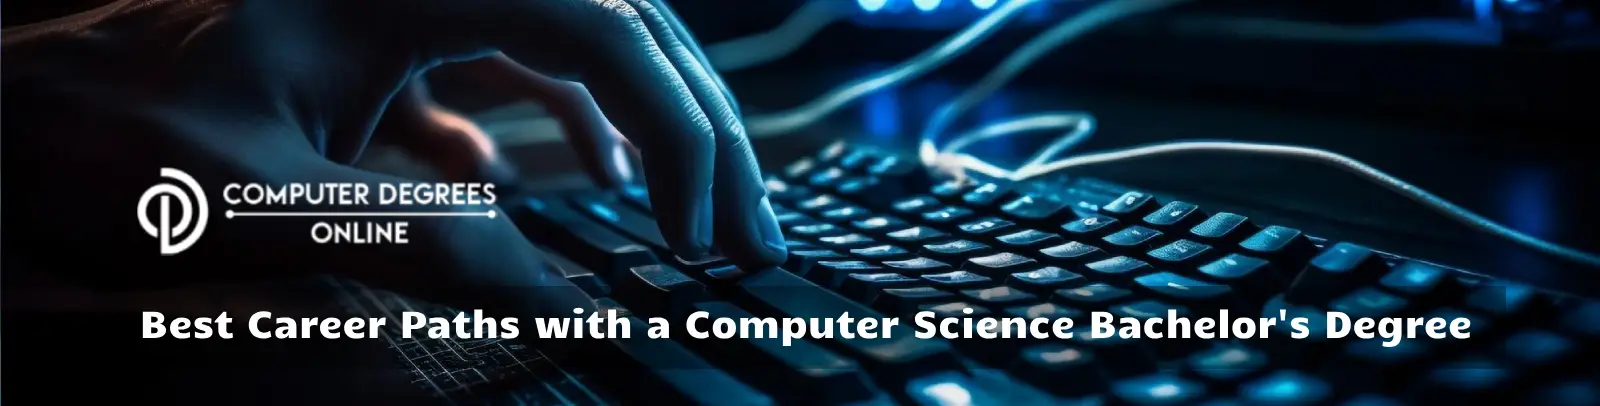 Best Career Paths with a Computer Science Bachelor's Degree